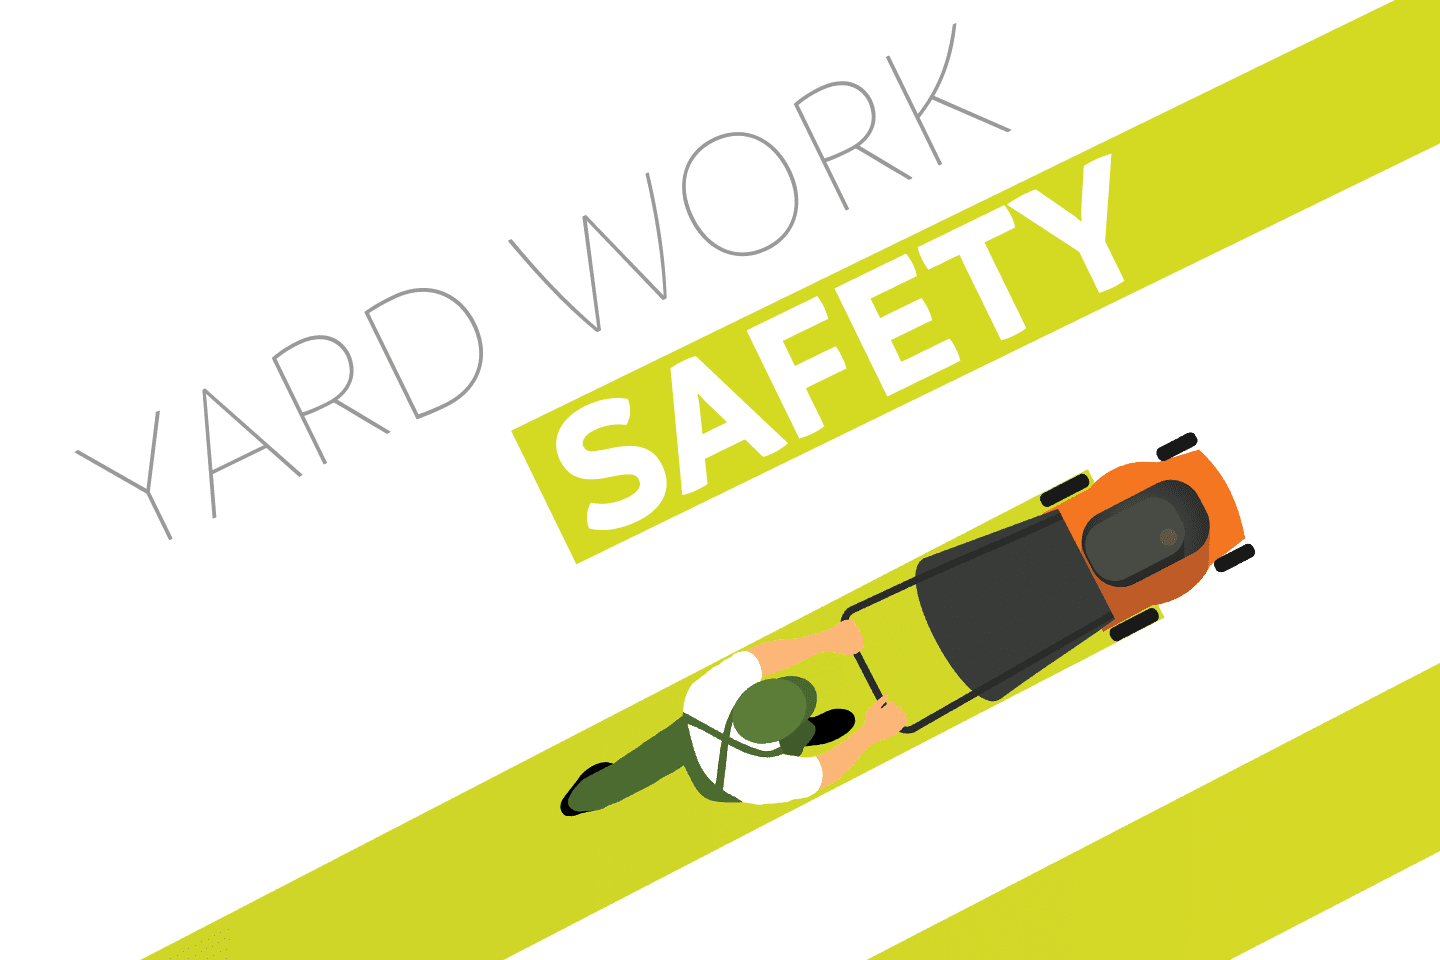 Yard work safety lawn mowing graphic chattanooga